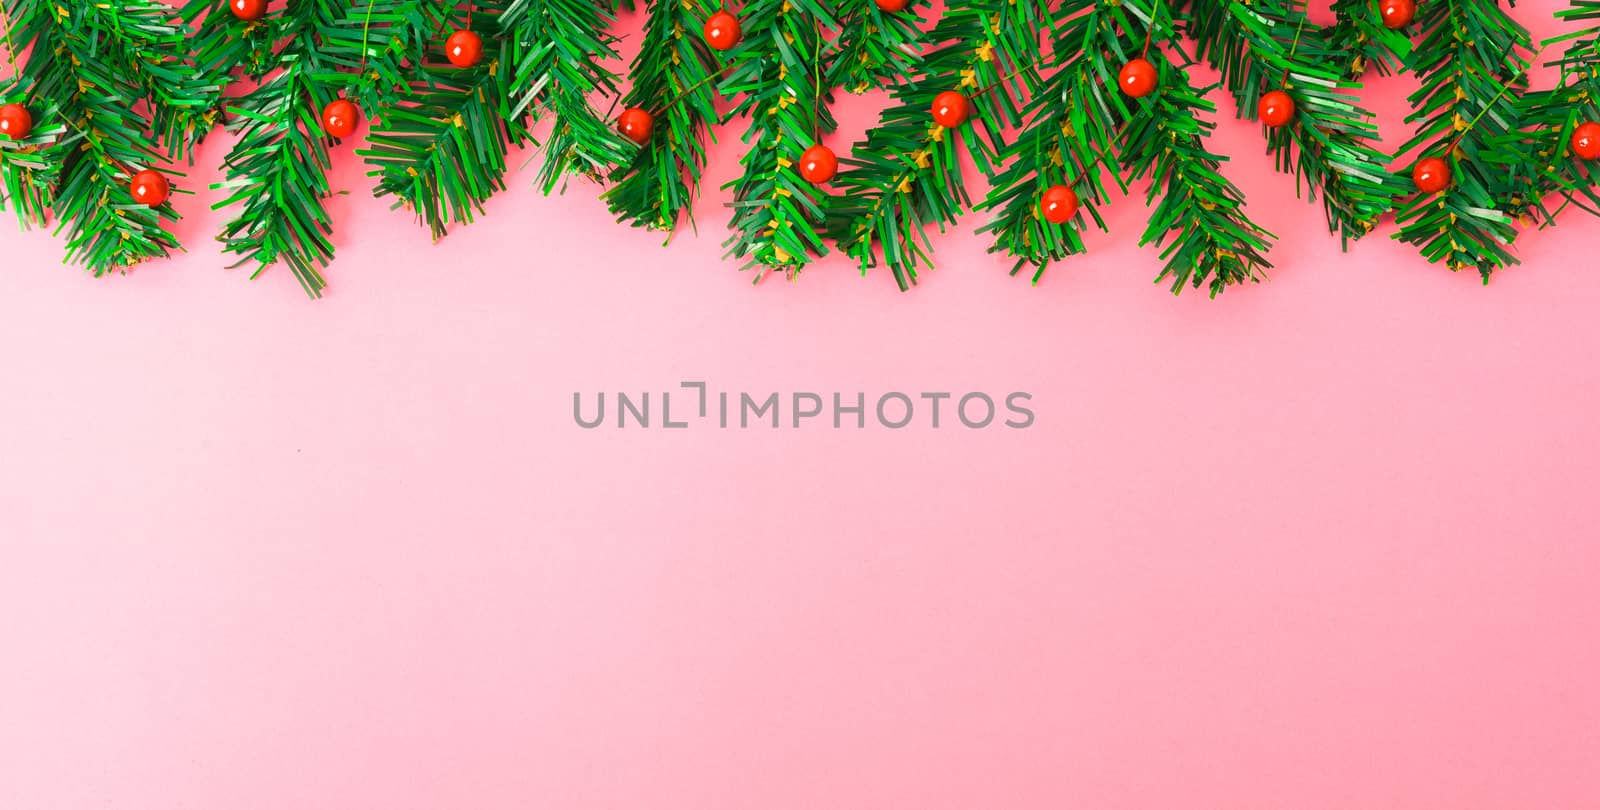 Happy New Year and Christmas day, top view flat lay composition decoration tree fir branch on pink background with copy space for your text